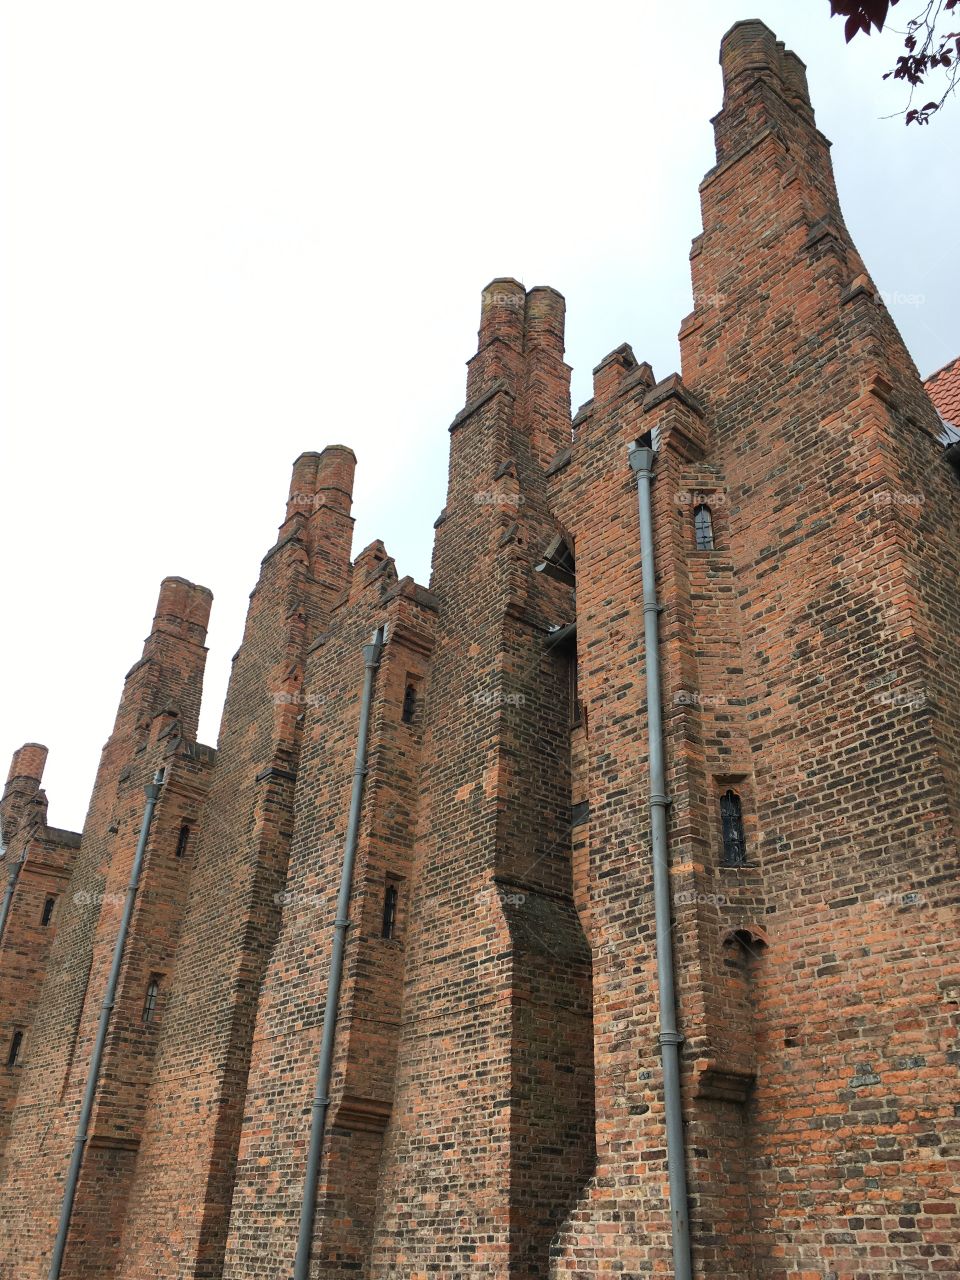 Exterior view of the various elaborate chimneys at the medieval Manor House of Gainsborough Old Hall